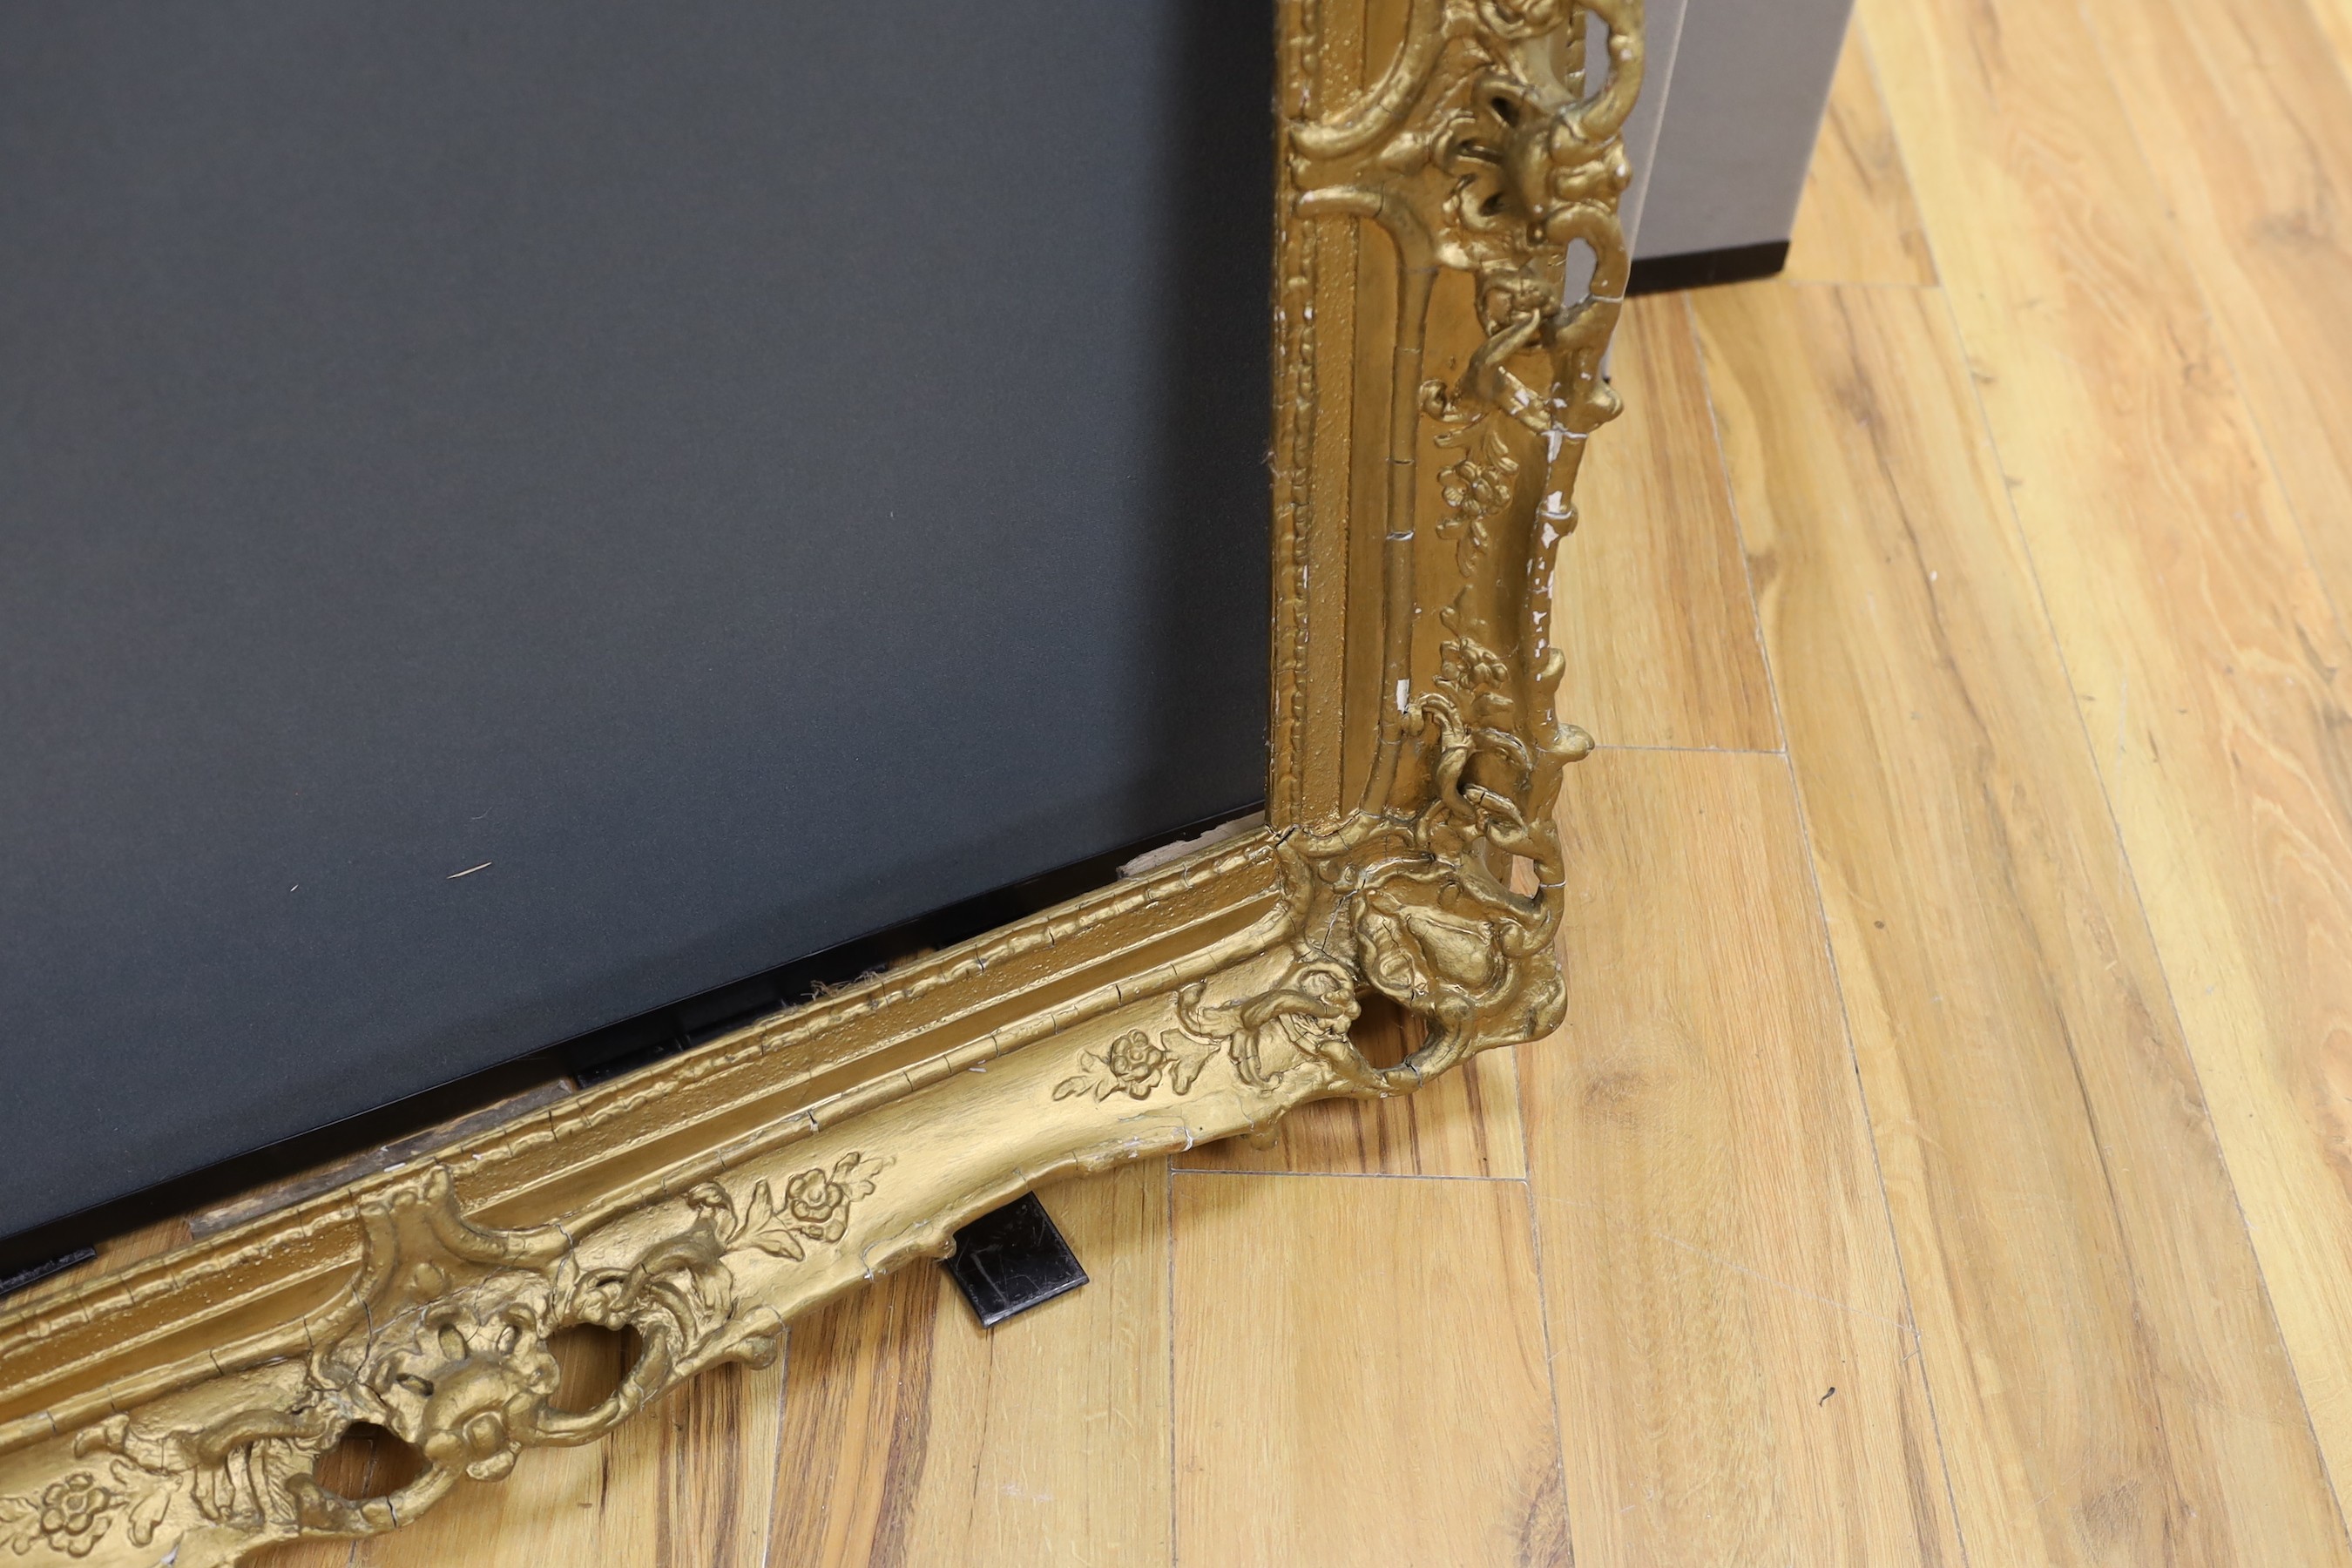 An ornate painted gilt picture frame, 90 x 100cm overall